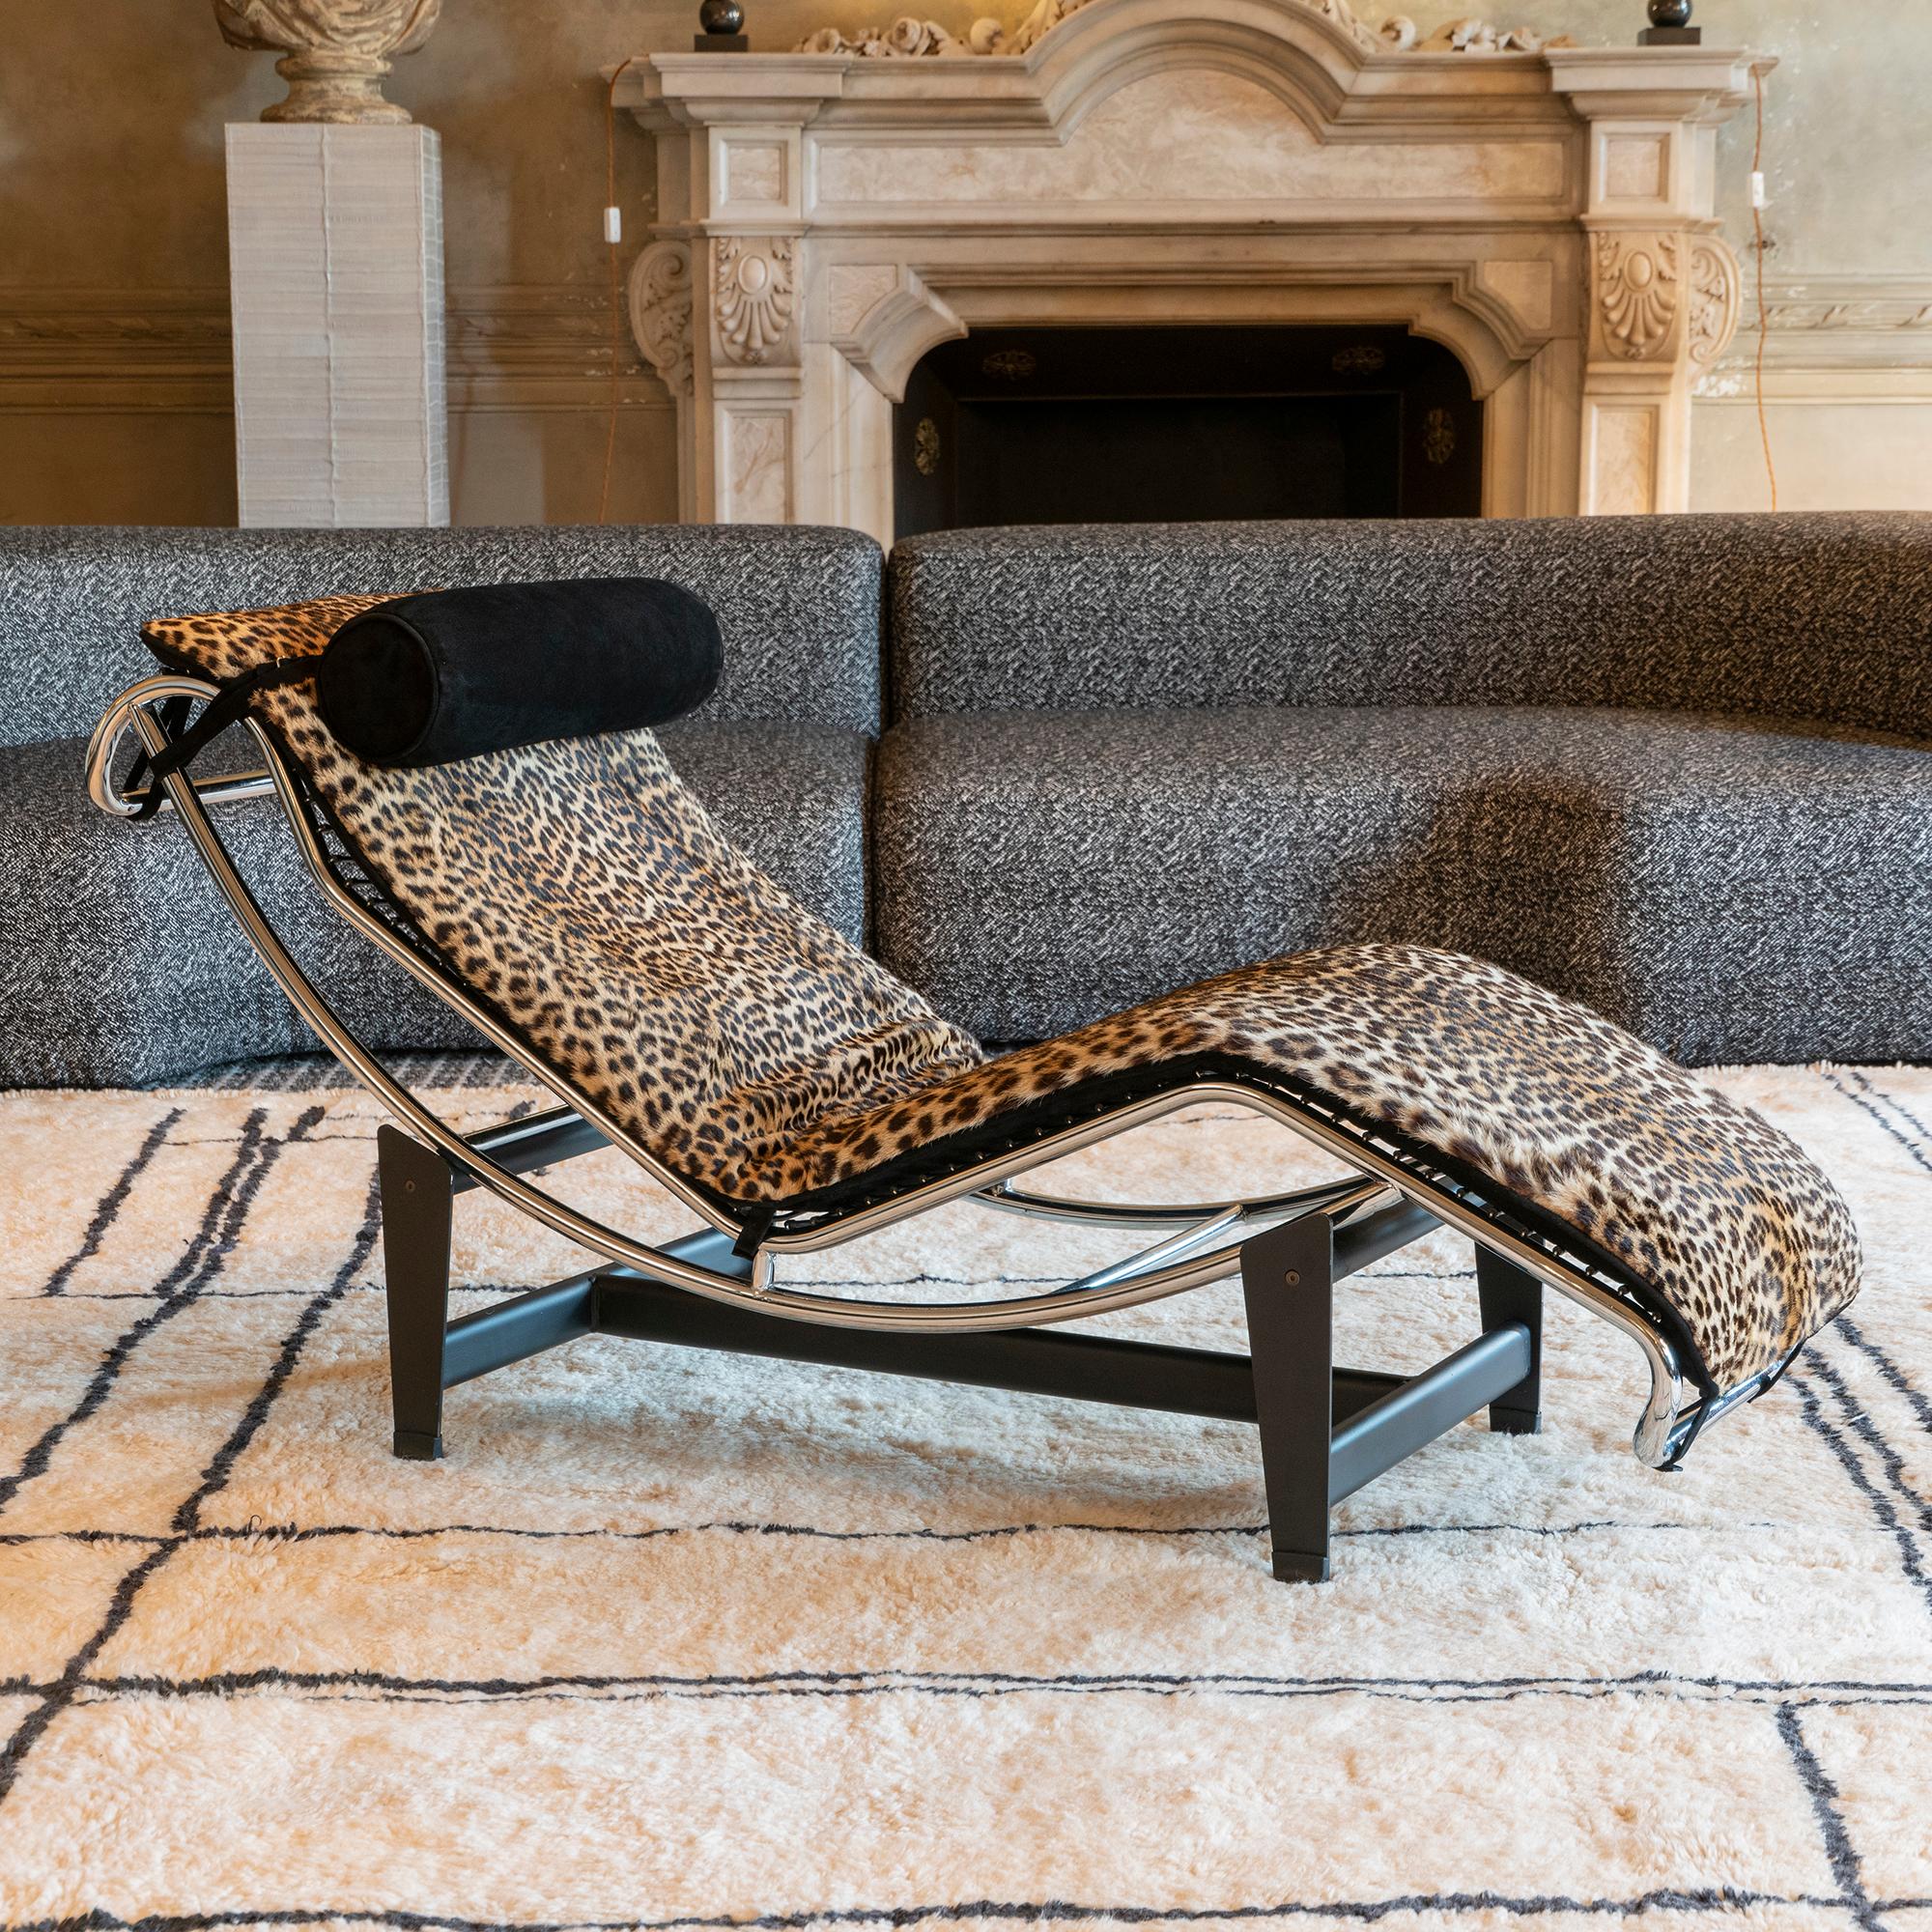 Lounge chair in the style of the Le Corbusier LC4, (the base is not signed and numbered like the original one by Cassina), original vintage leopard skin with vintage patina and perfect condition, the back black suede and headrest cushion are newly